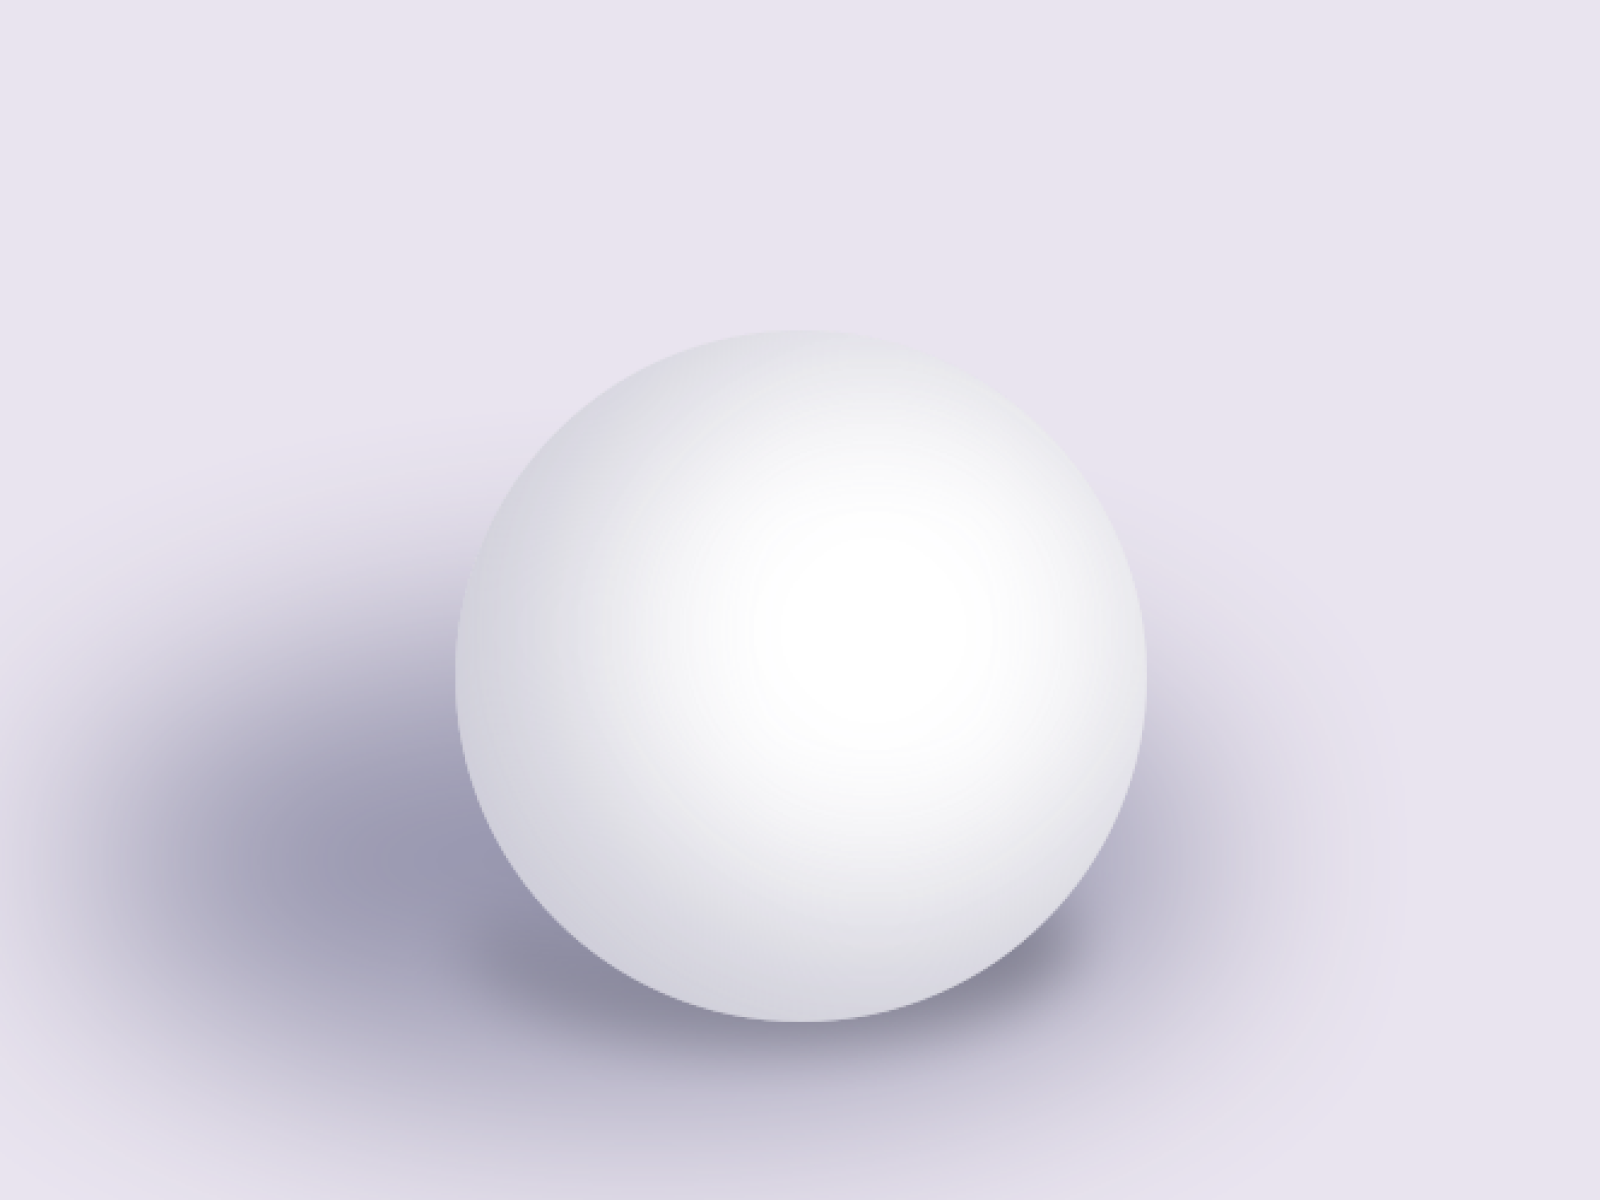 Lavender Ball by Rebecca Goberstein on Dribbble